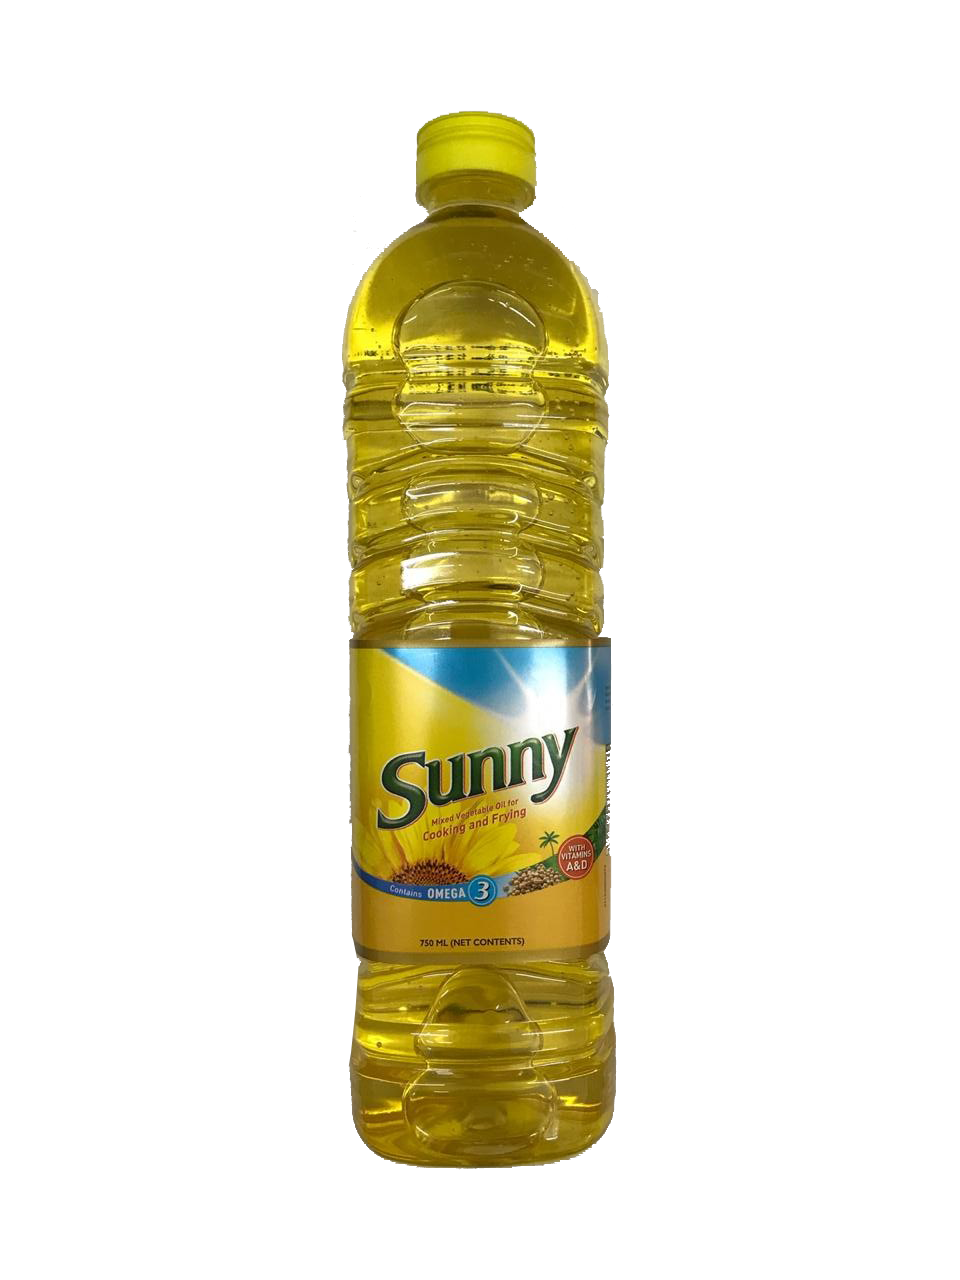 Sunny Cooking & Frying 750ml